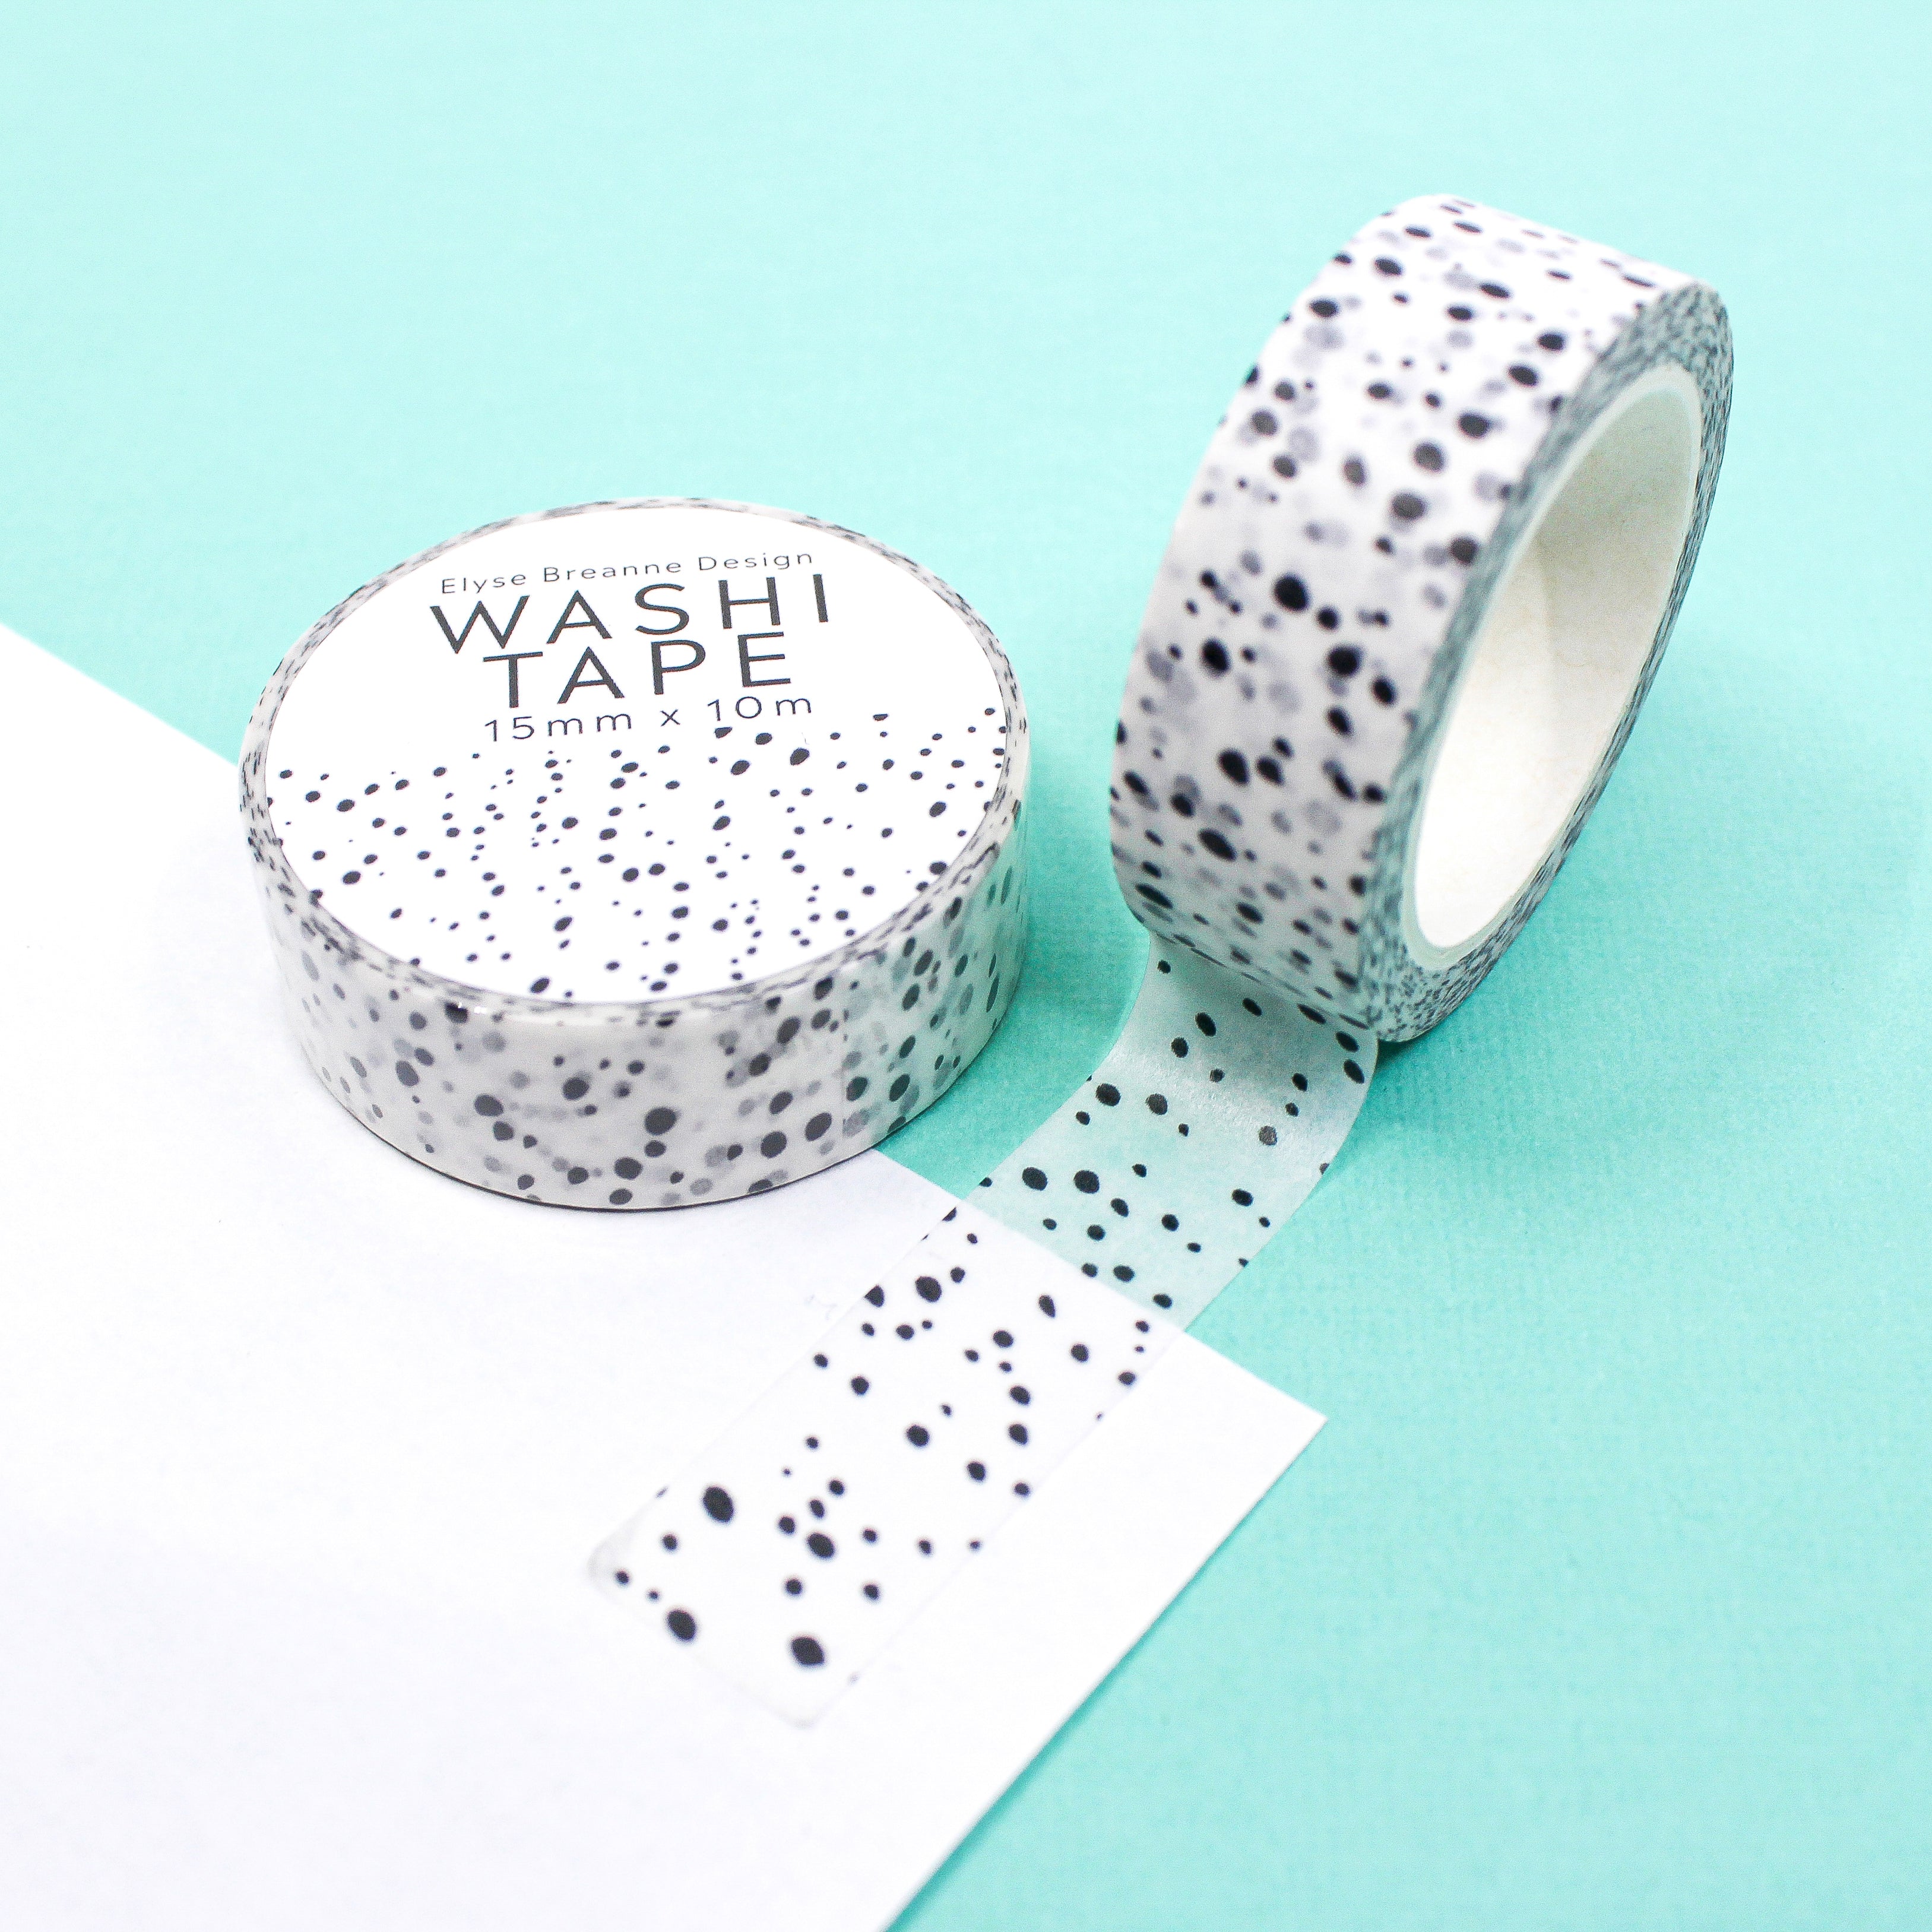 This is a black and white speckles themed washi tape from Elyse Breanne Design and sold at BBB Supplies Craft Shop